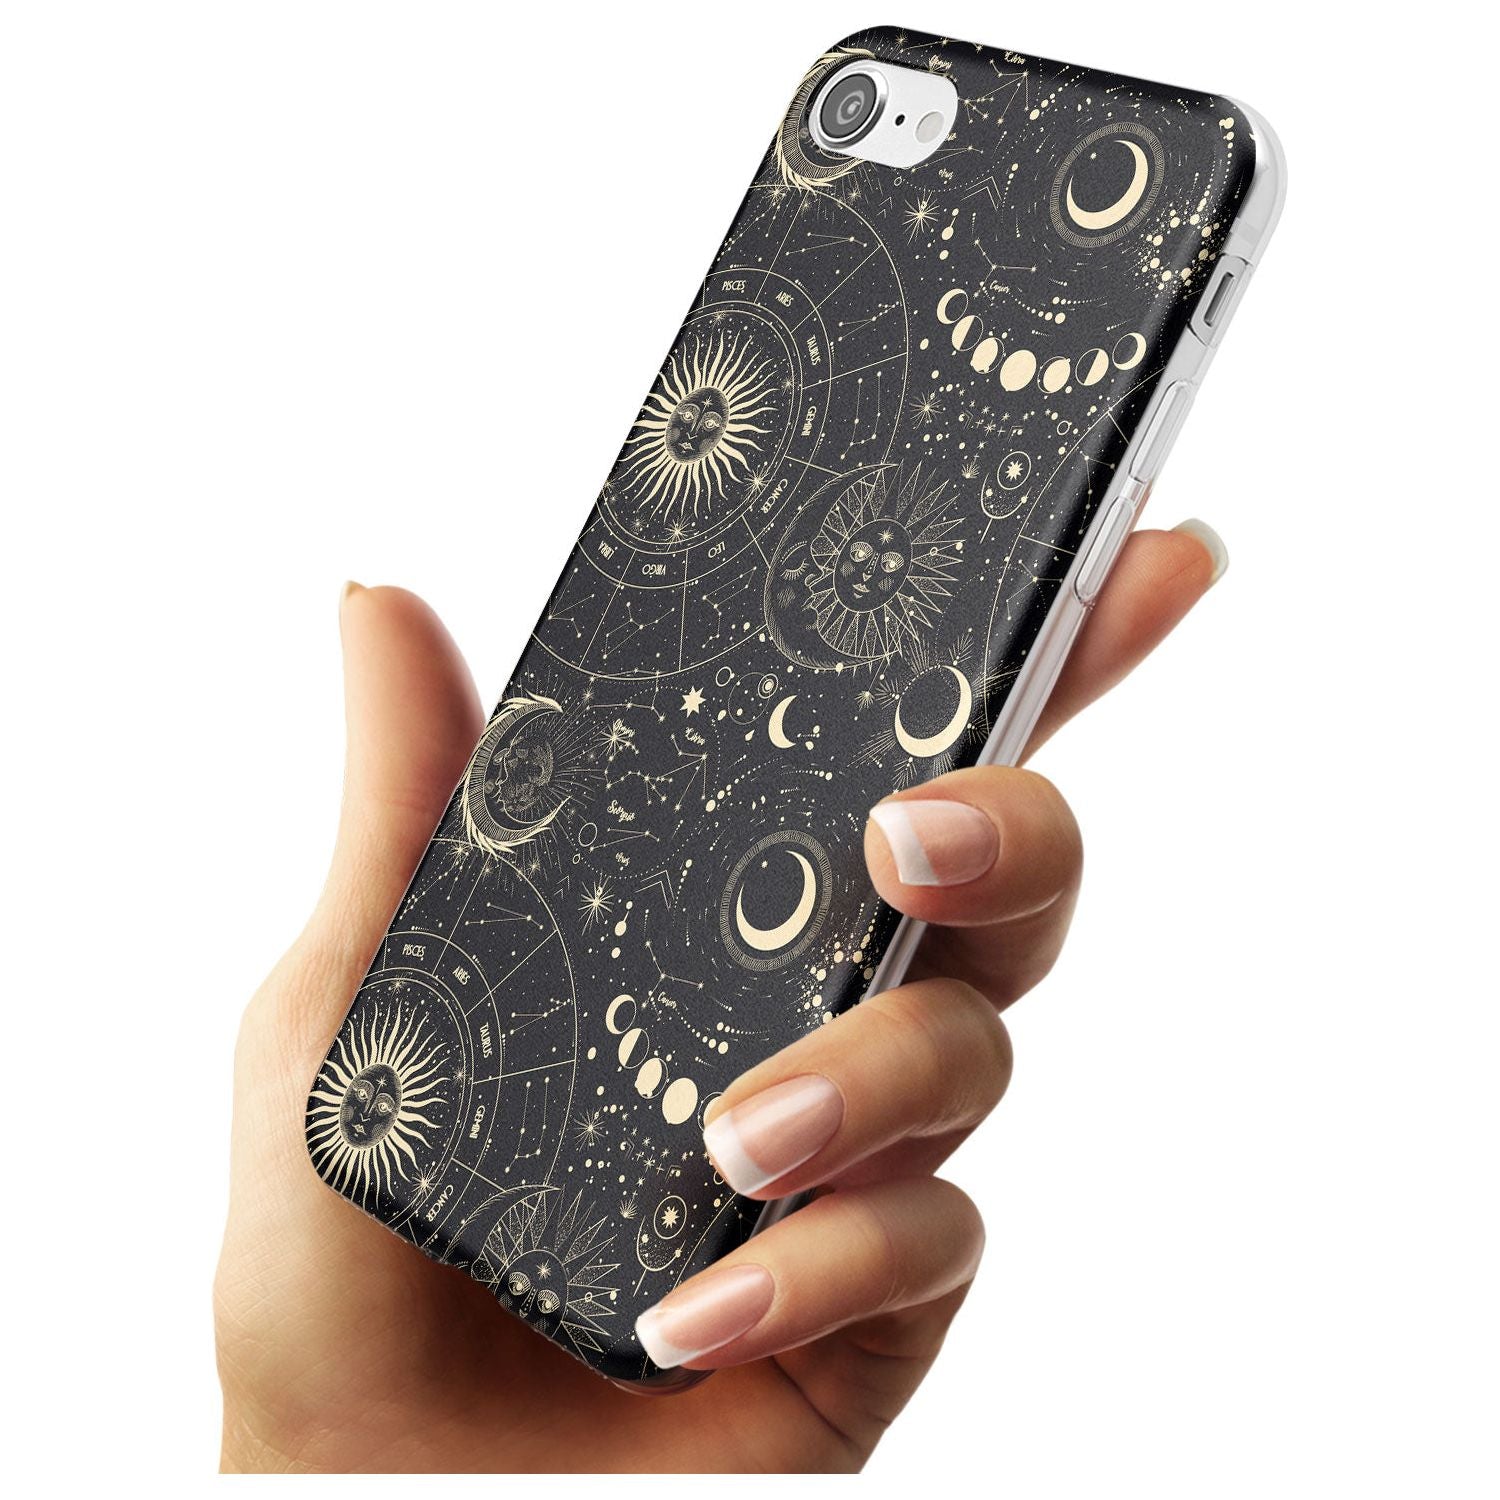 Suns, Moons & Star Signs Black Impact Phone Case for iPhone SE 8 7 Plus